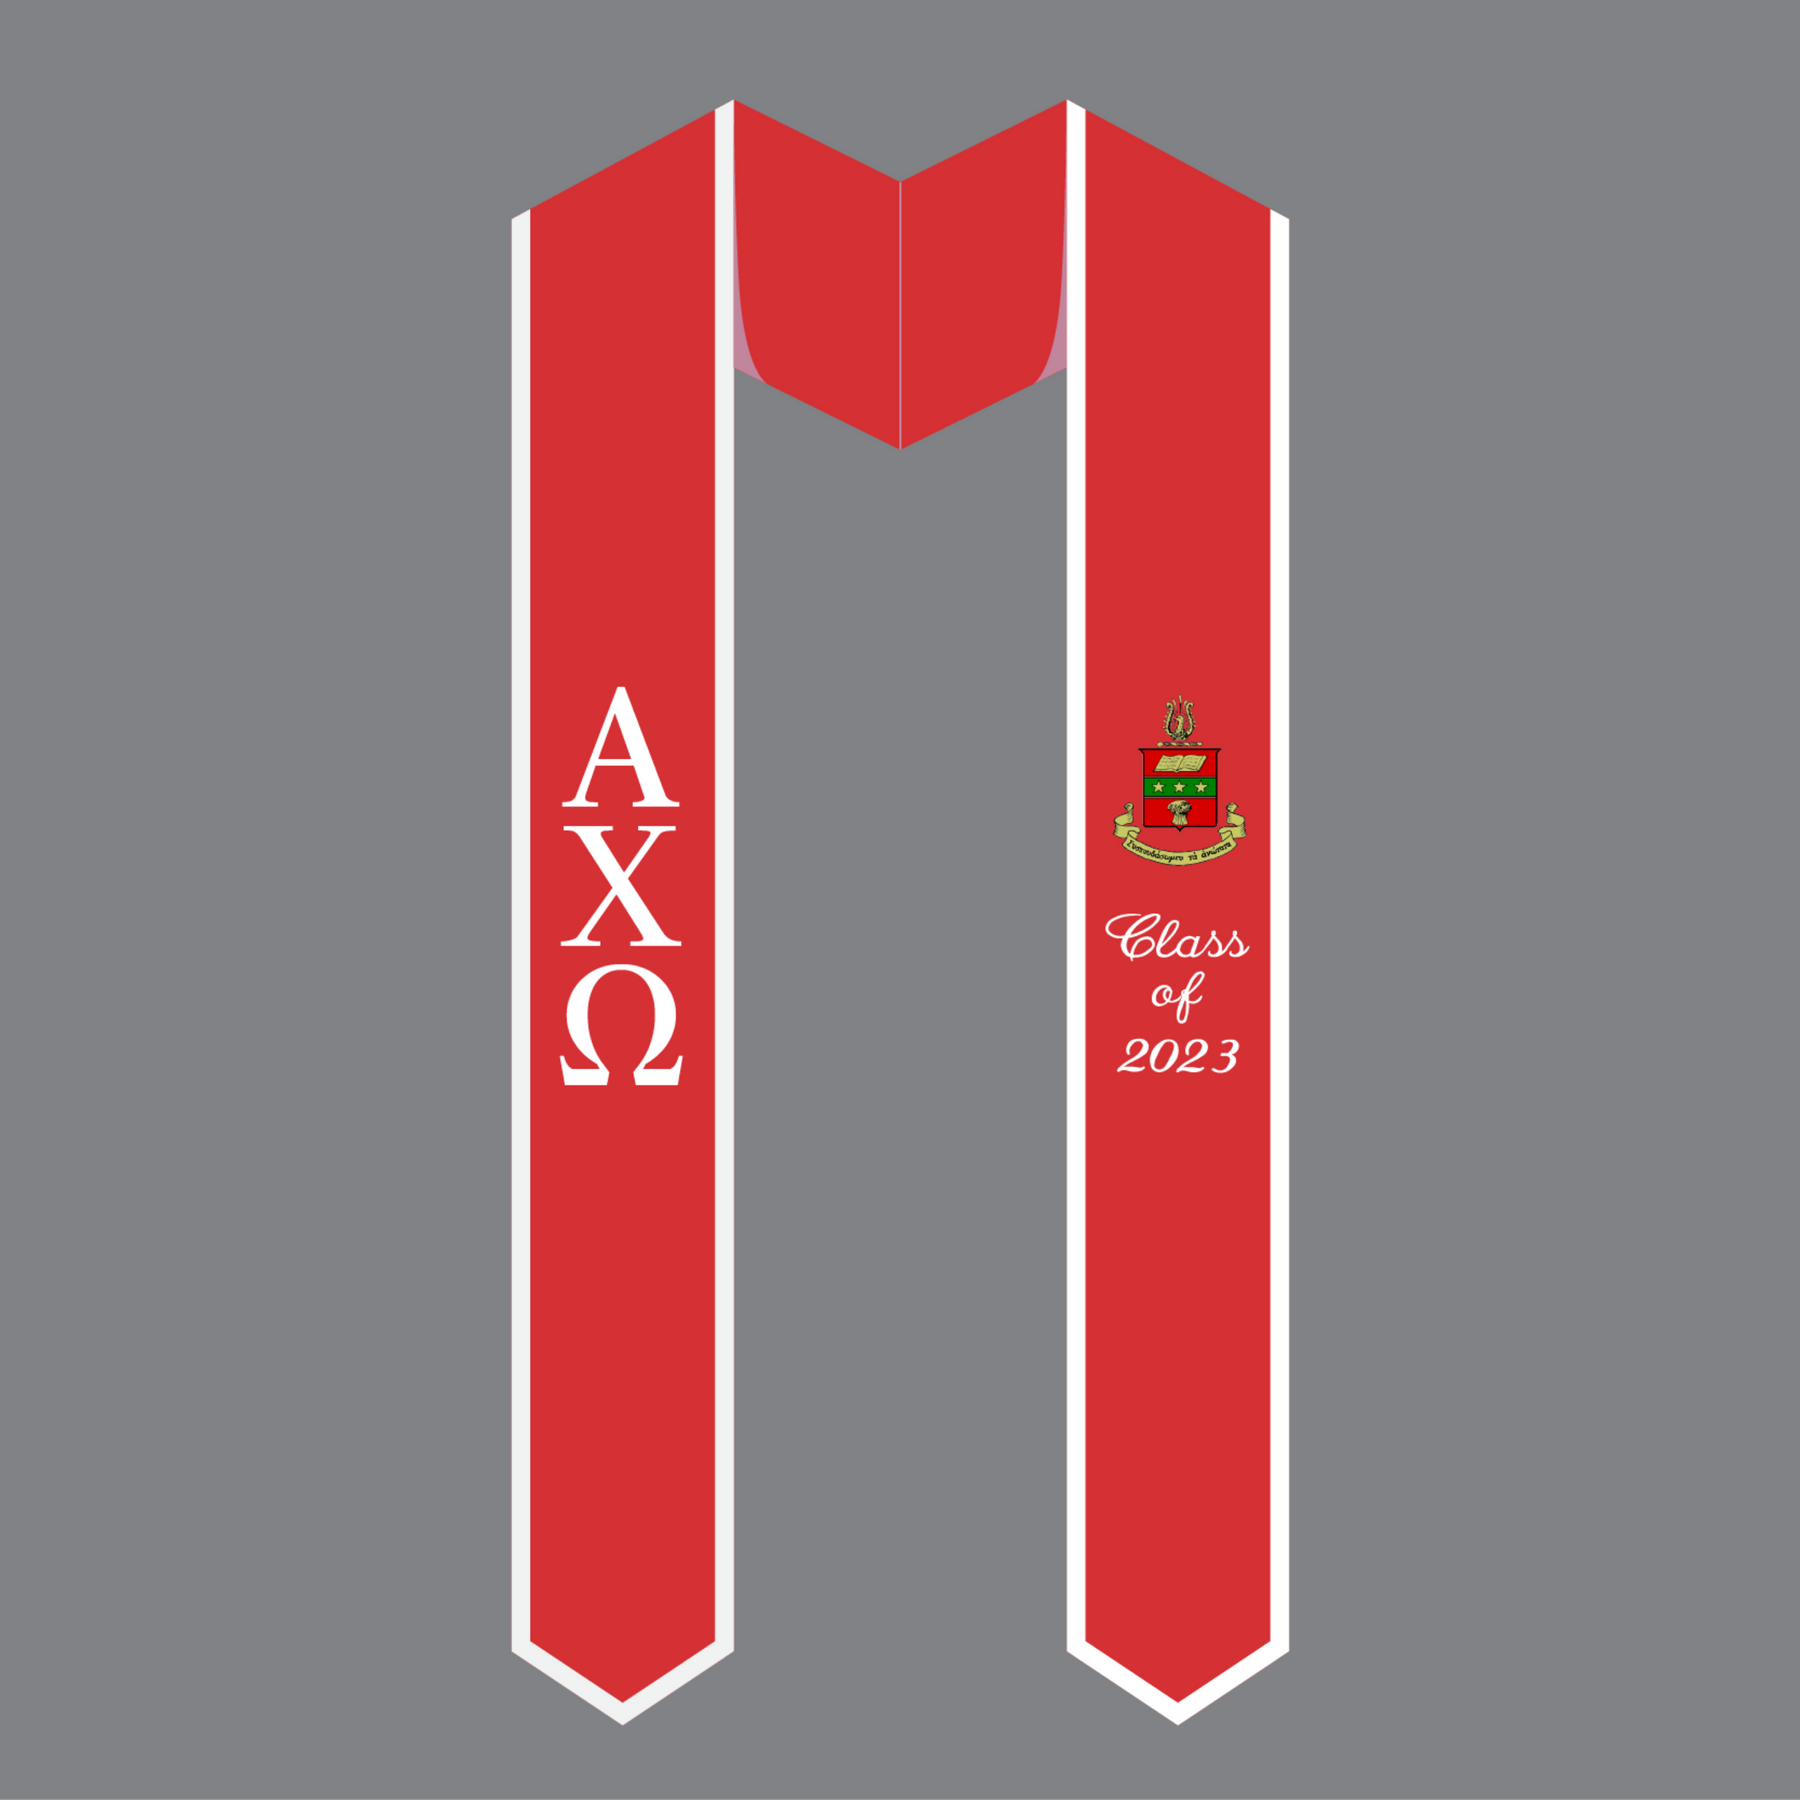 Alpha Chi Omega Class of 2024 Graduation Stole in White